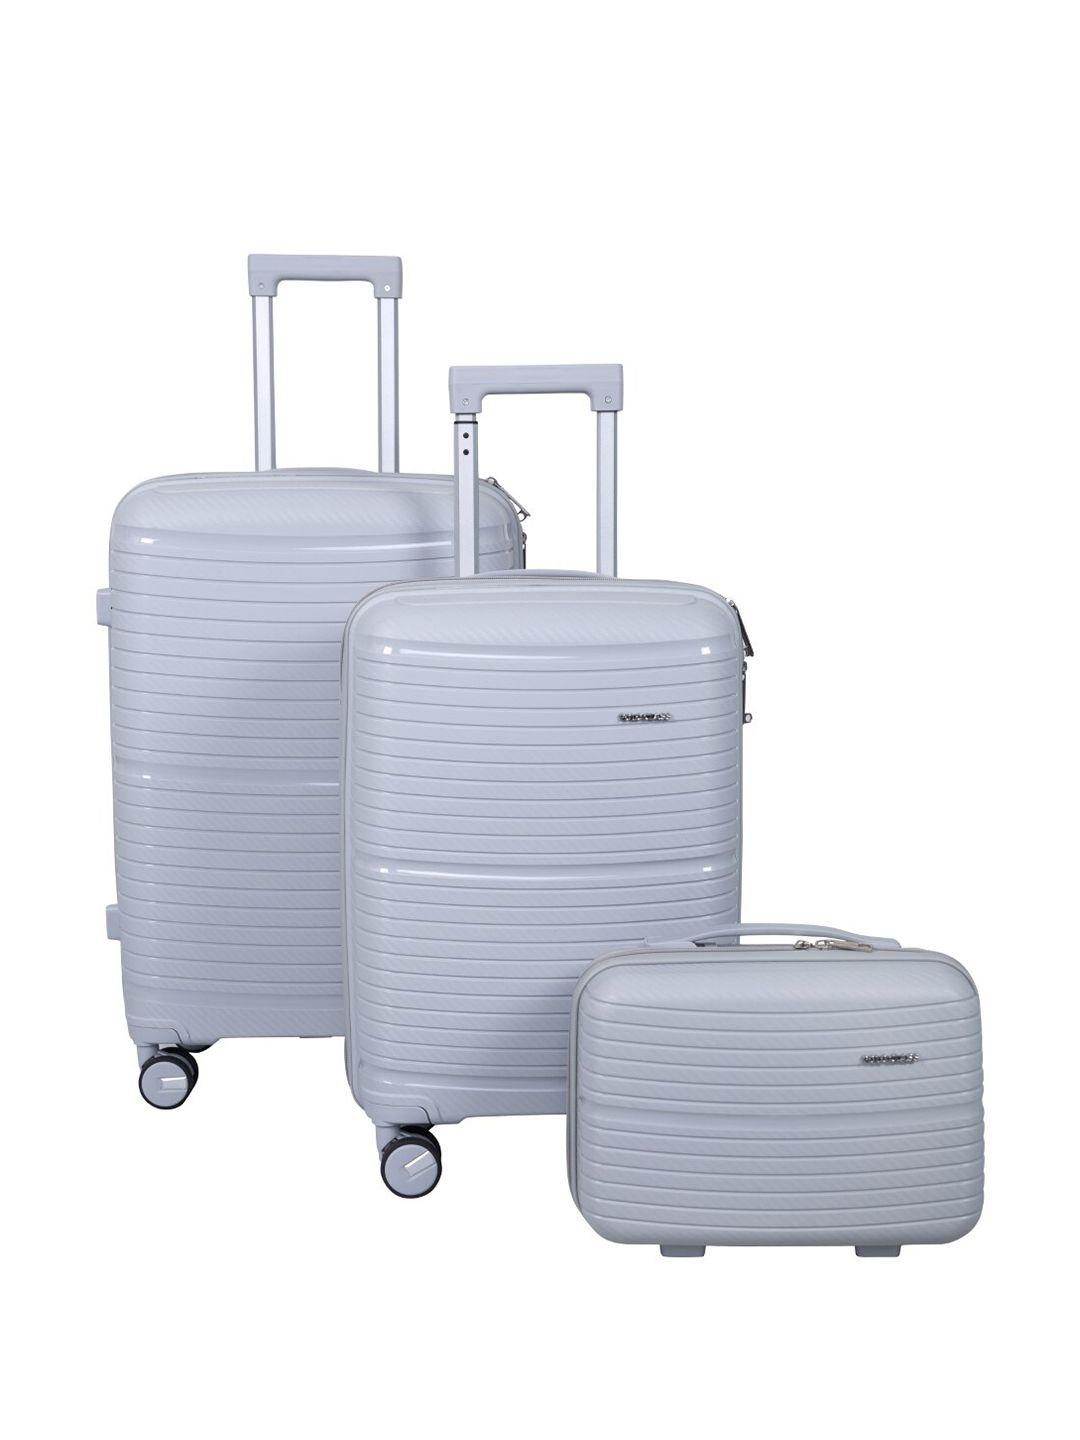 polo class set of 2 hard-sided trolley suitcase with vanity bag